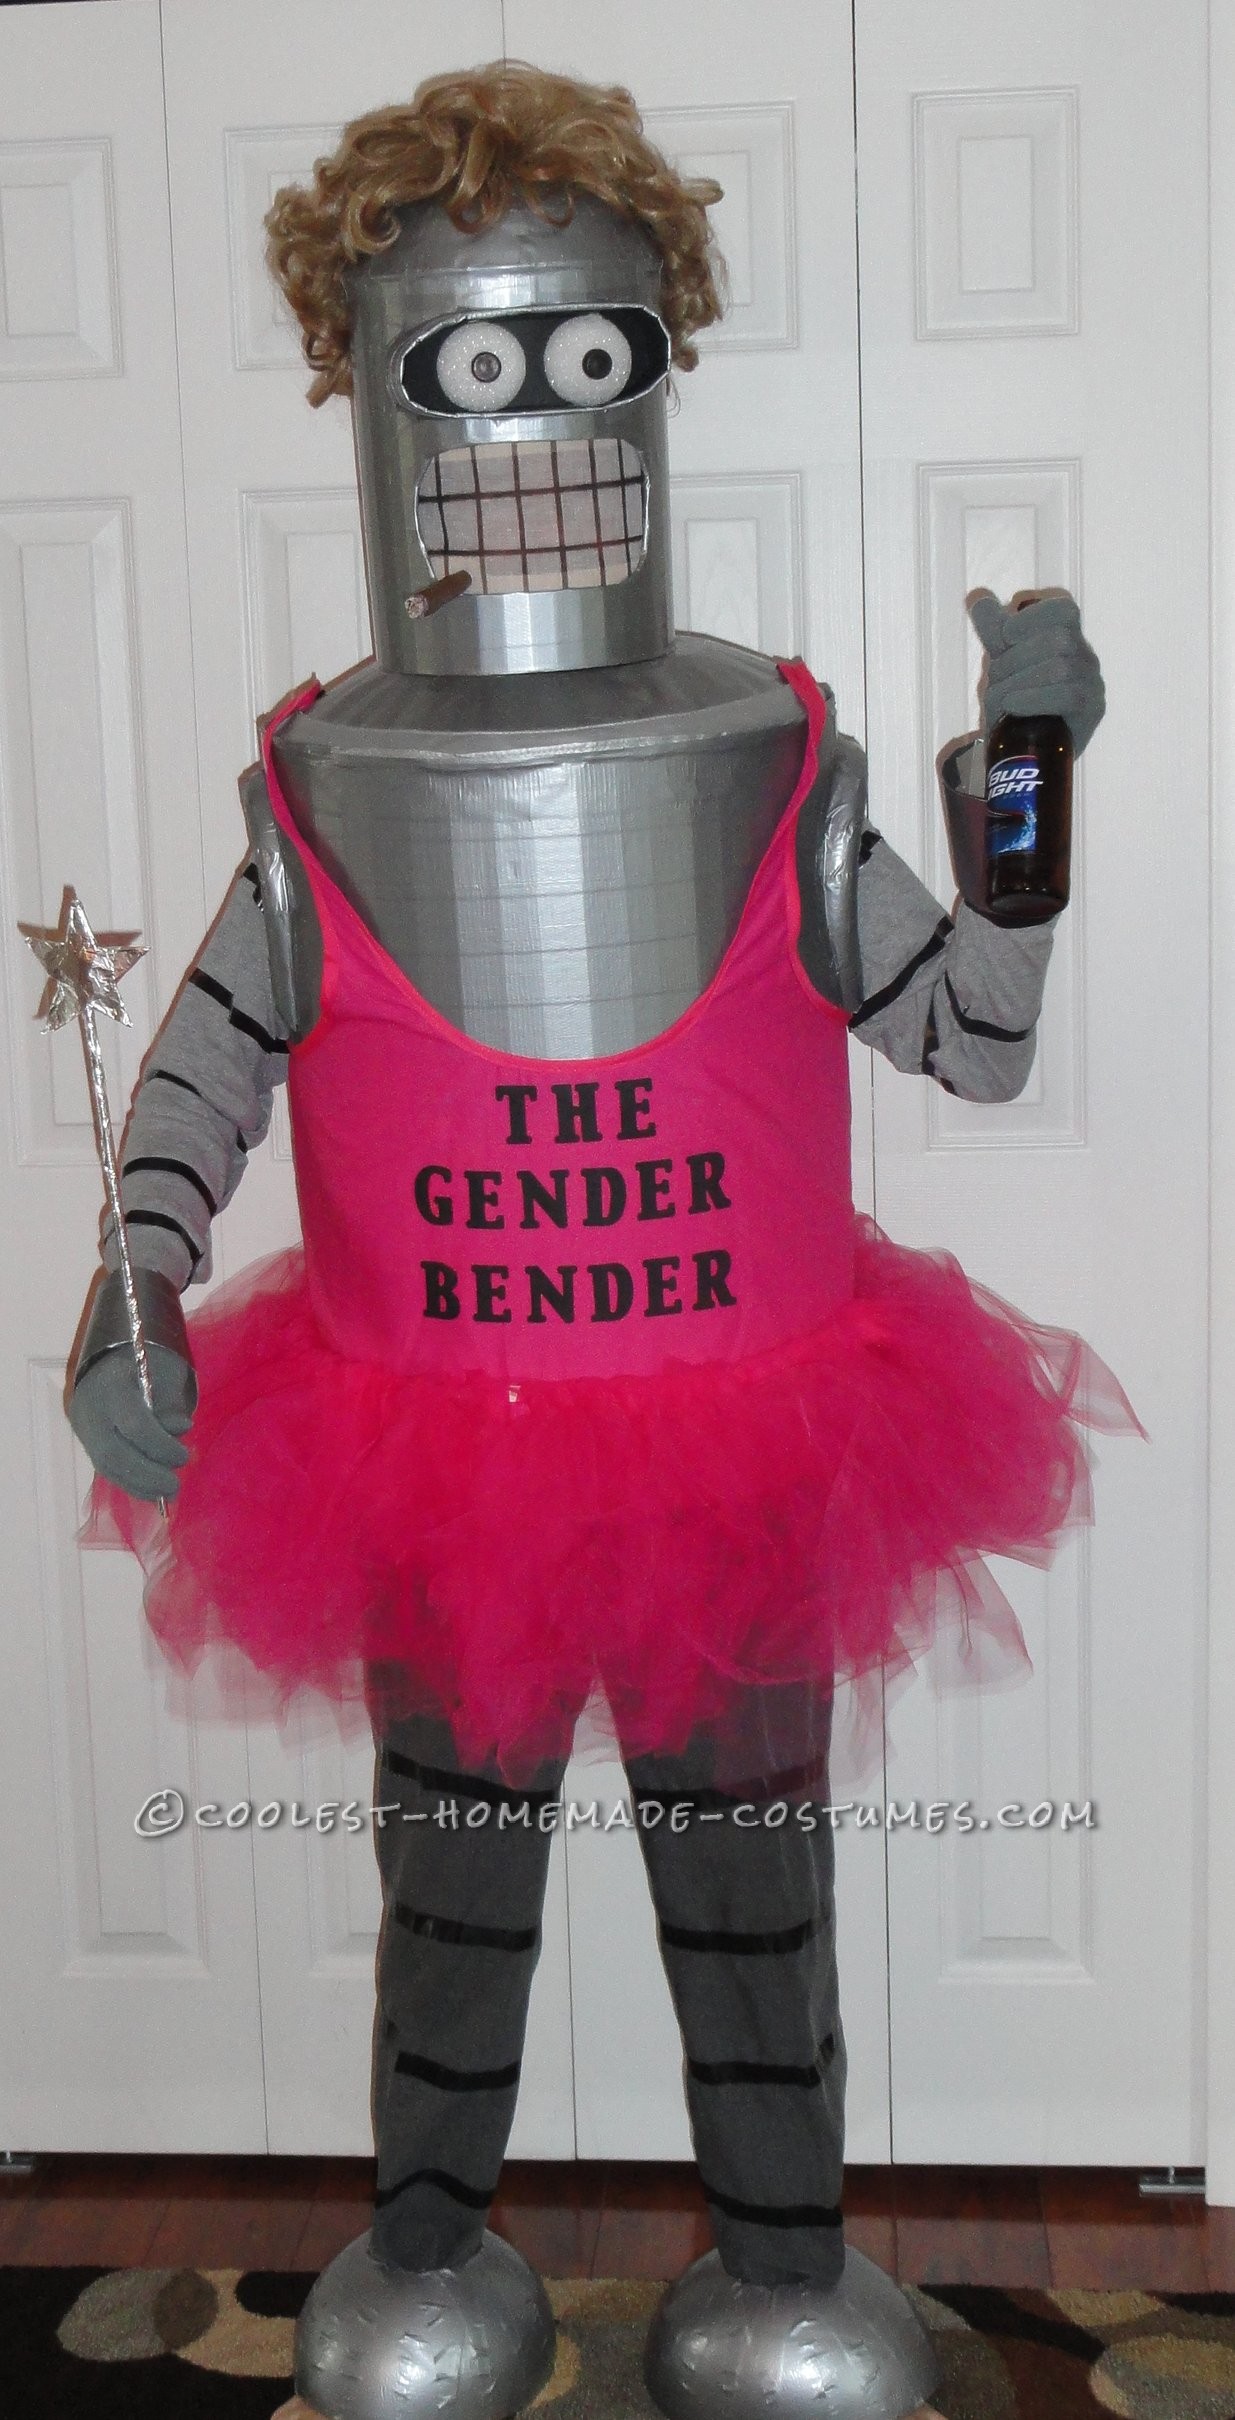 I wanted to do something special this year so I chose the “Gender” Bender. For Bender I spent a lot of time on Benders head. It was impor